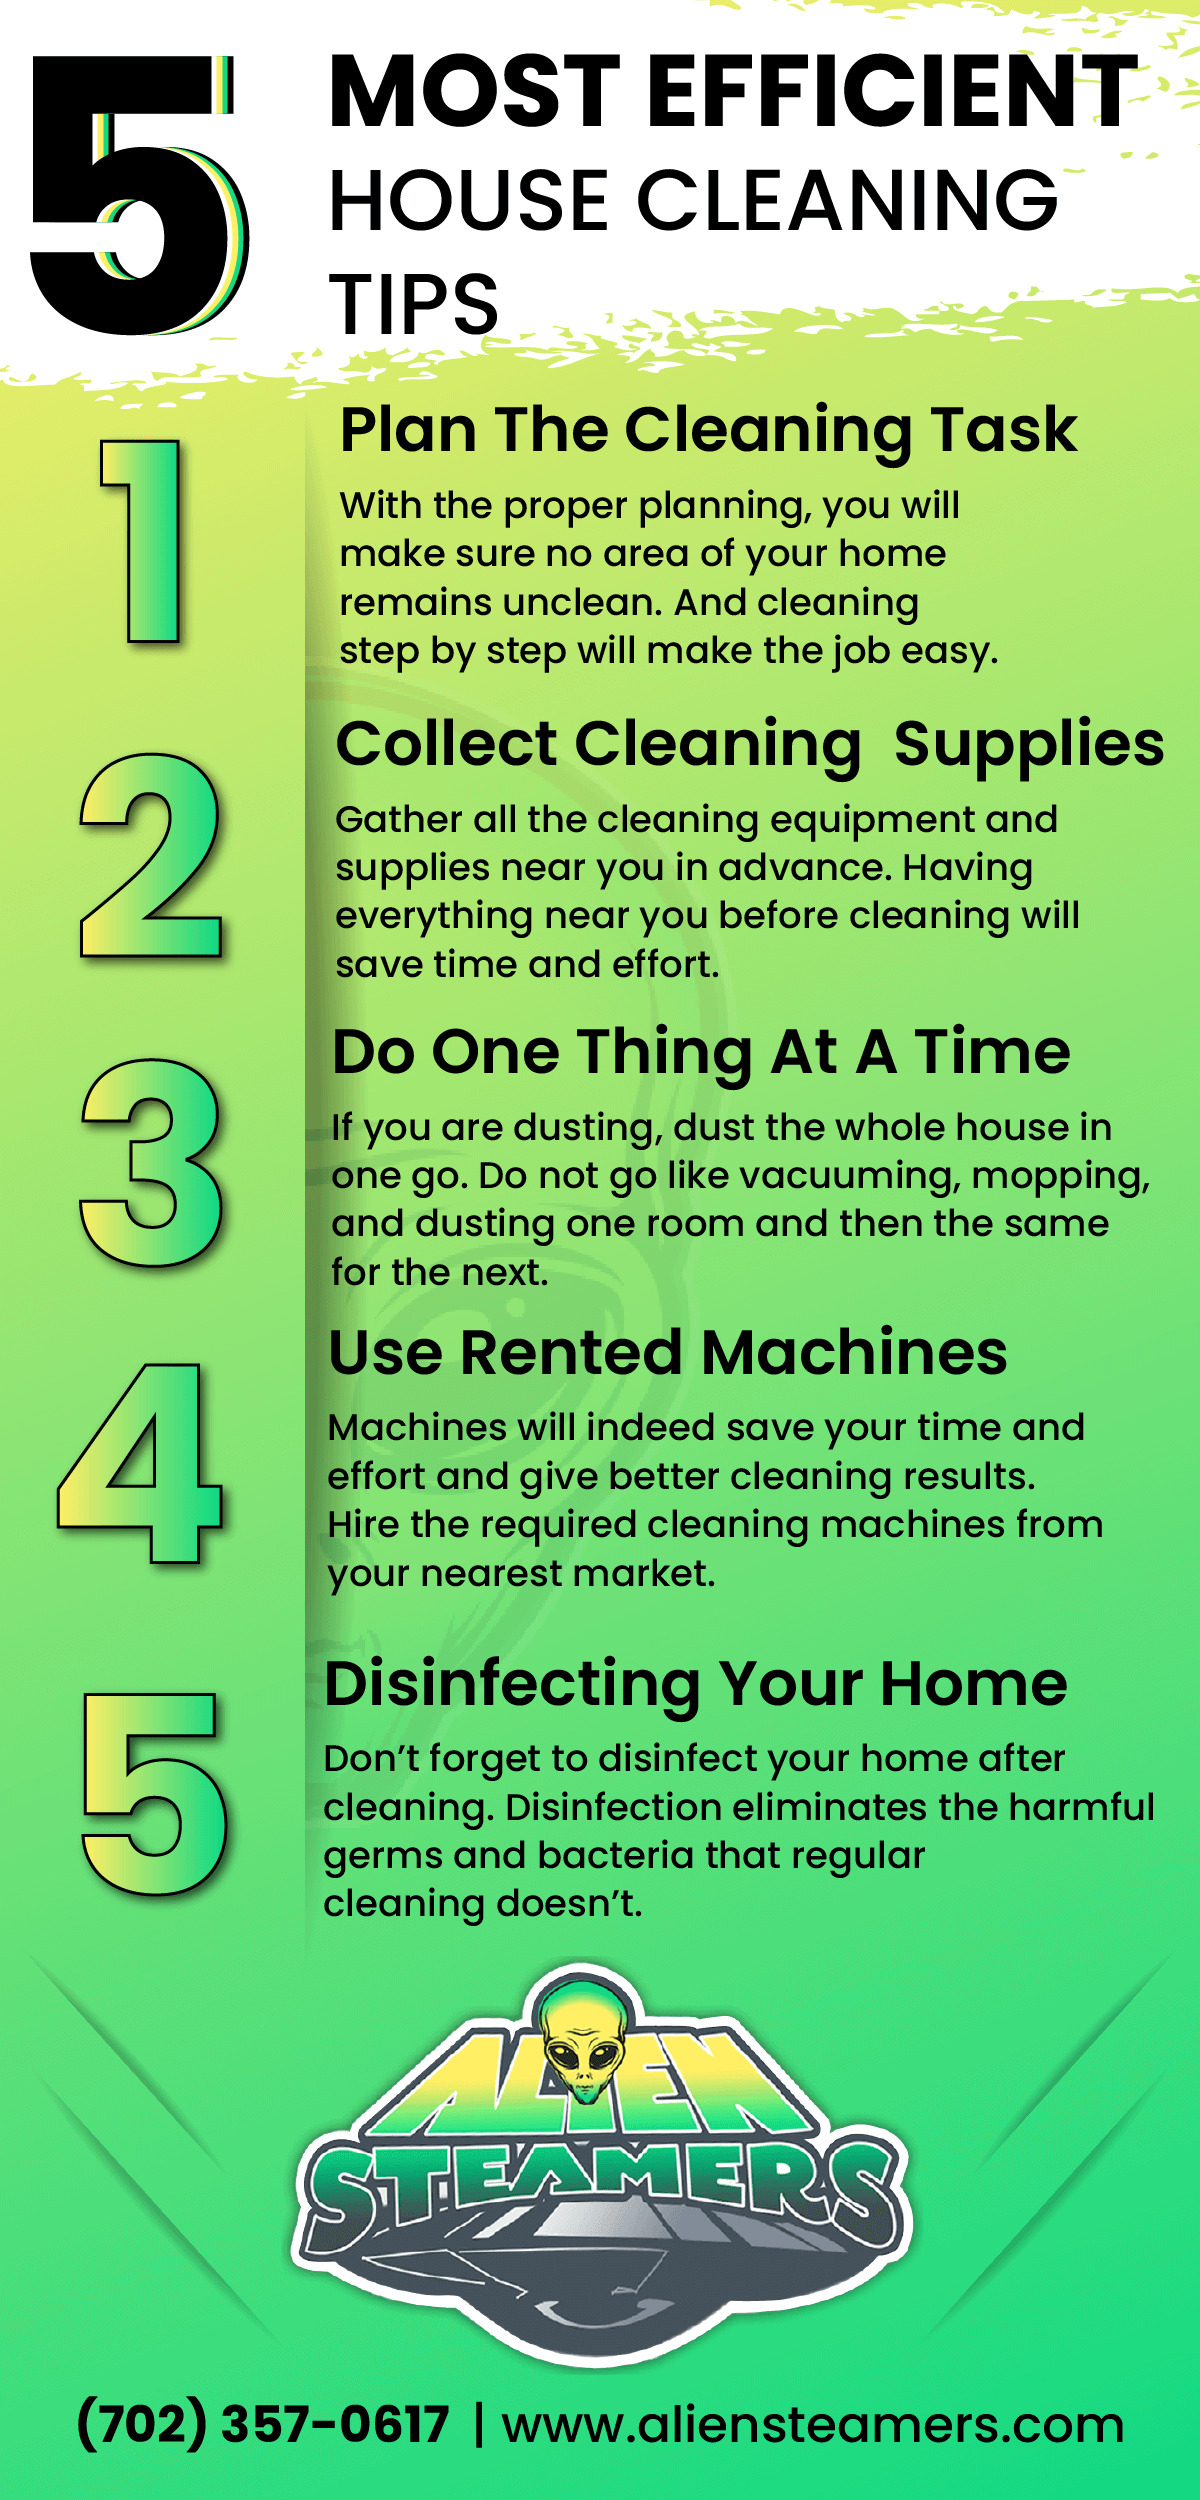 5 Most Efficient House Cleaning Tips